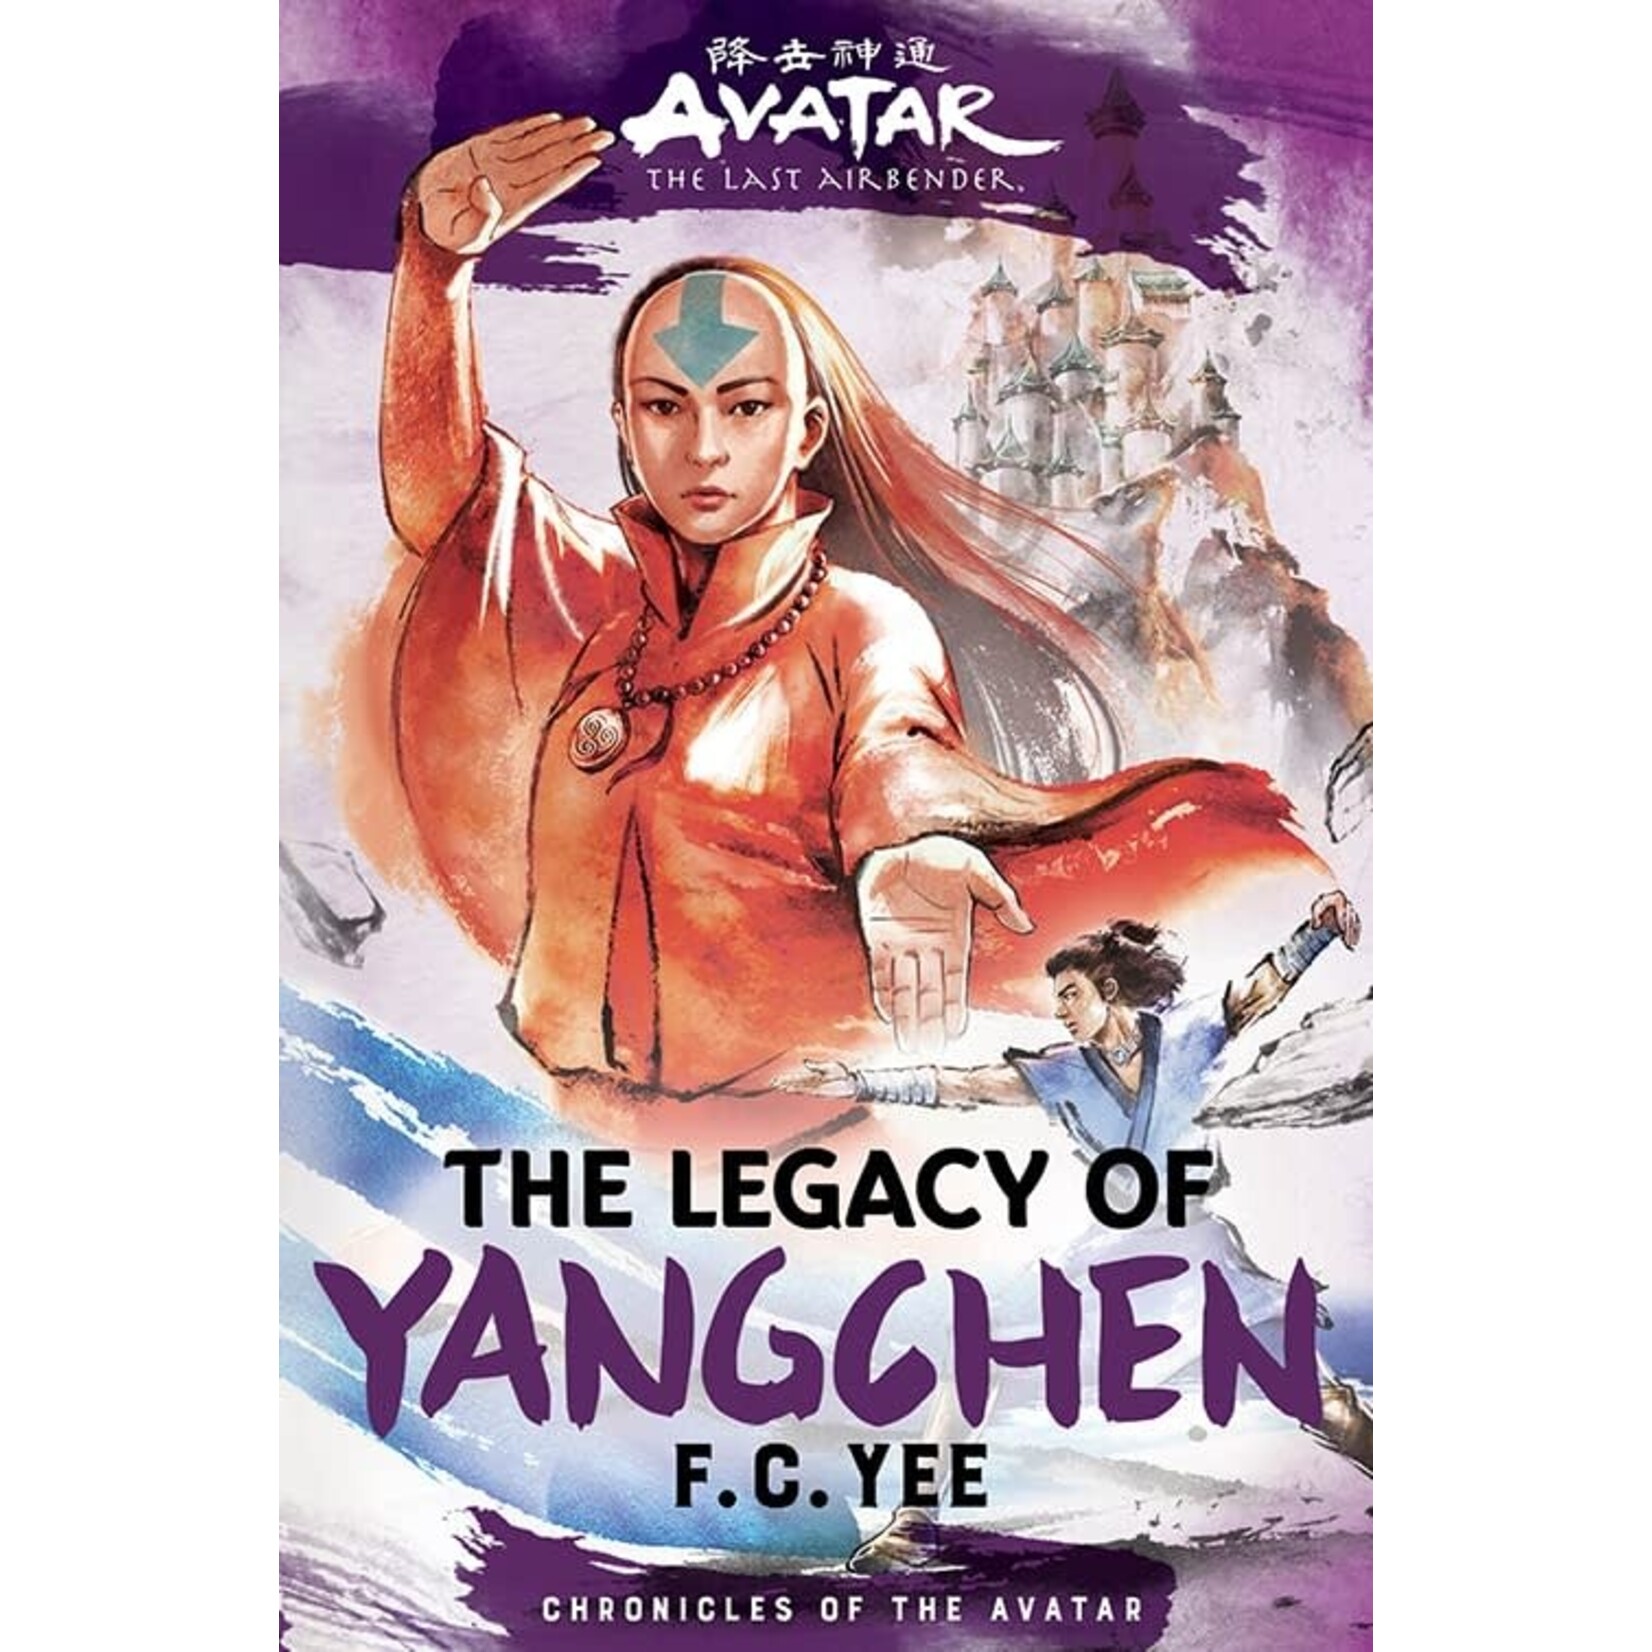 Avatar, the Last Airbender: The Legacy of Yangchen (Chronicles of the Avatar Book 4)